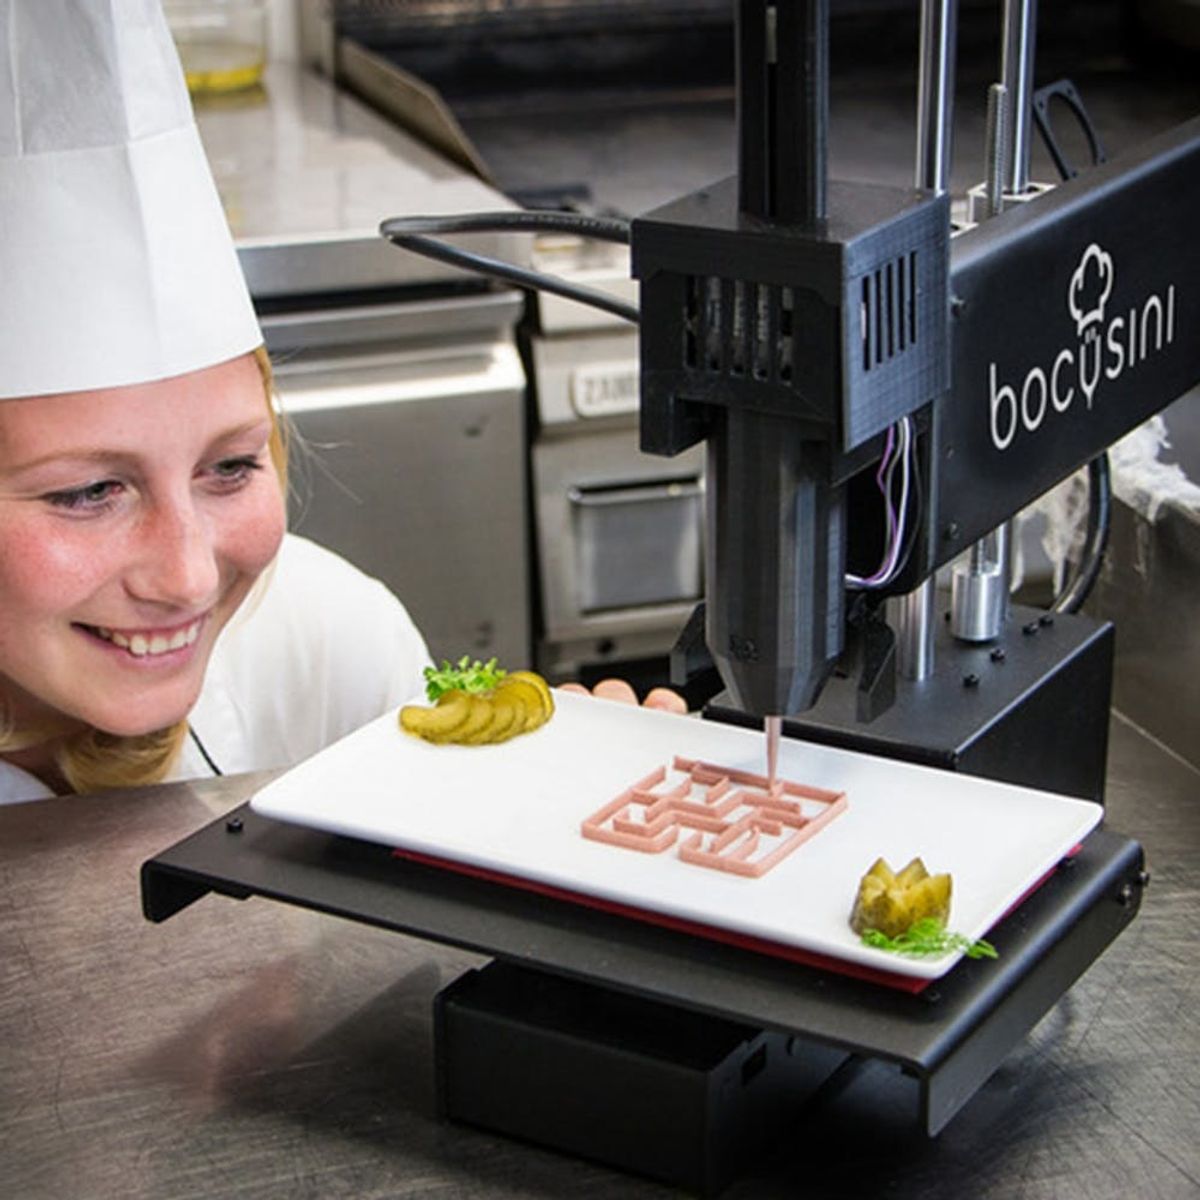 Your Kitchen Could Soon Have an Affordable 3D Food Printer